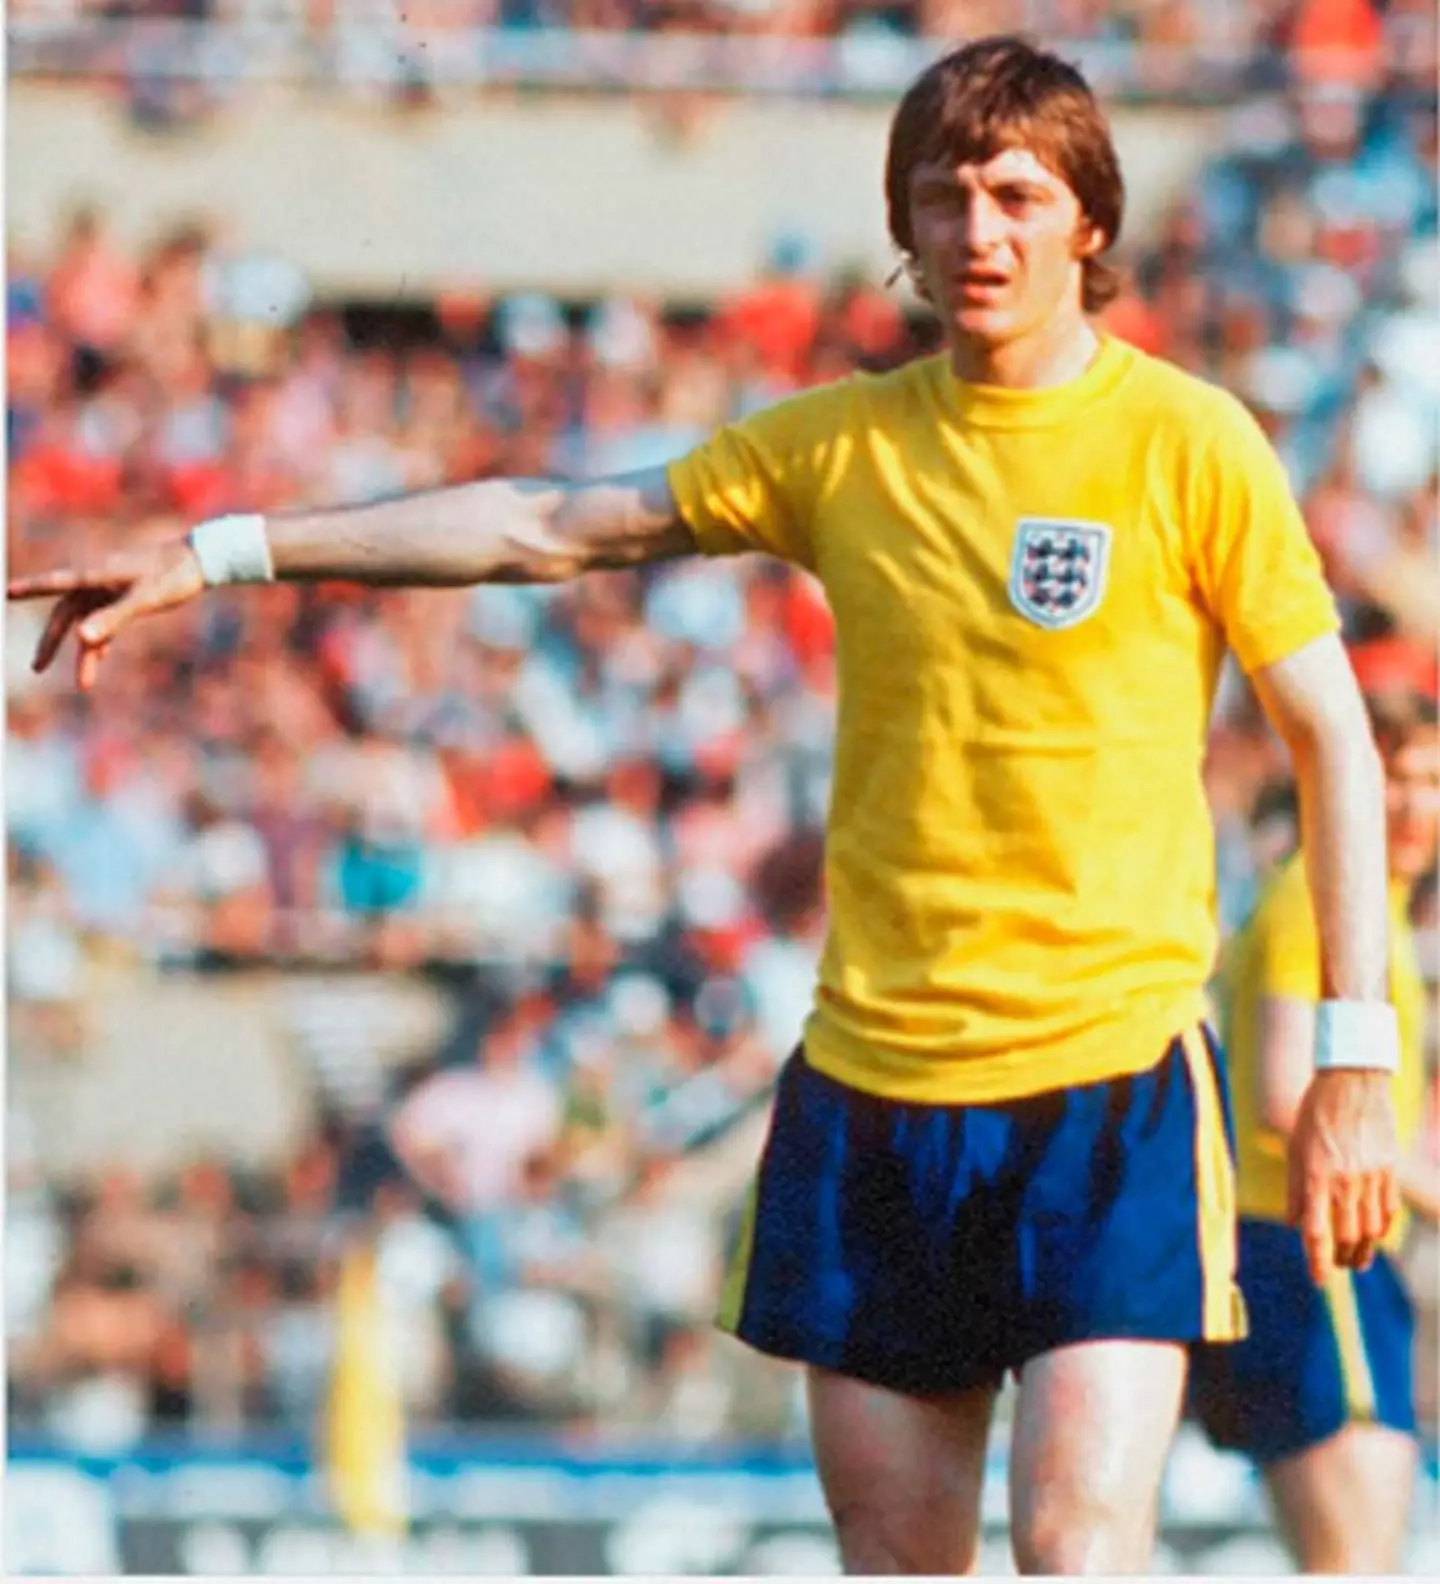 Alan Clarke was one of very few players who wore England's yellow kit.